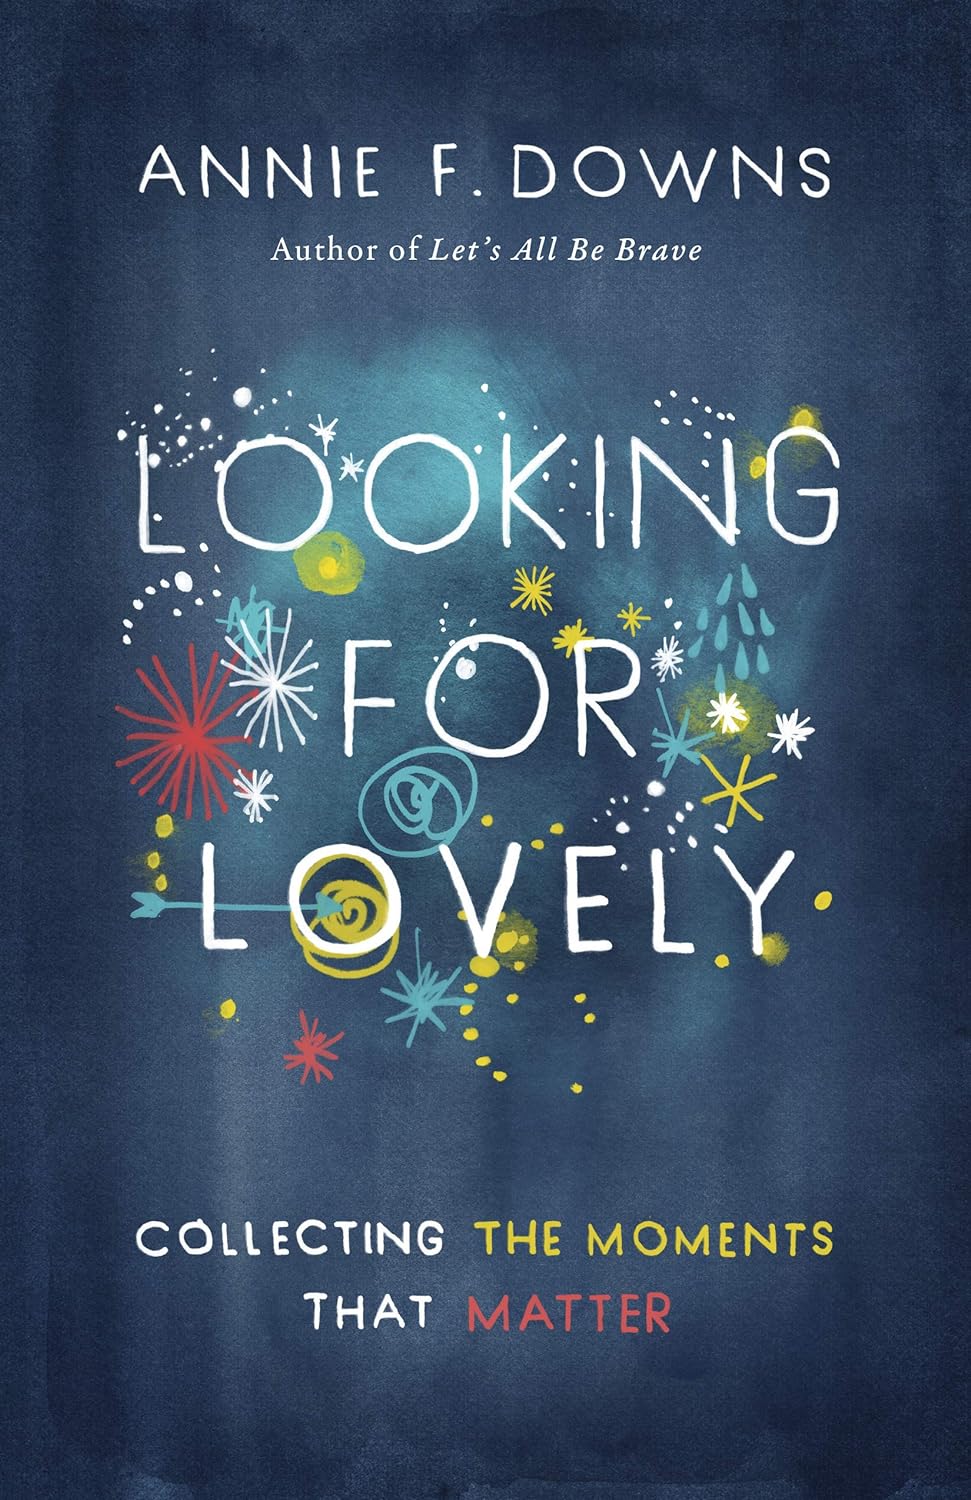 Looking for Lovely - Annie F. Downs